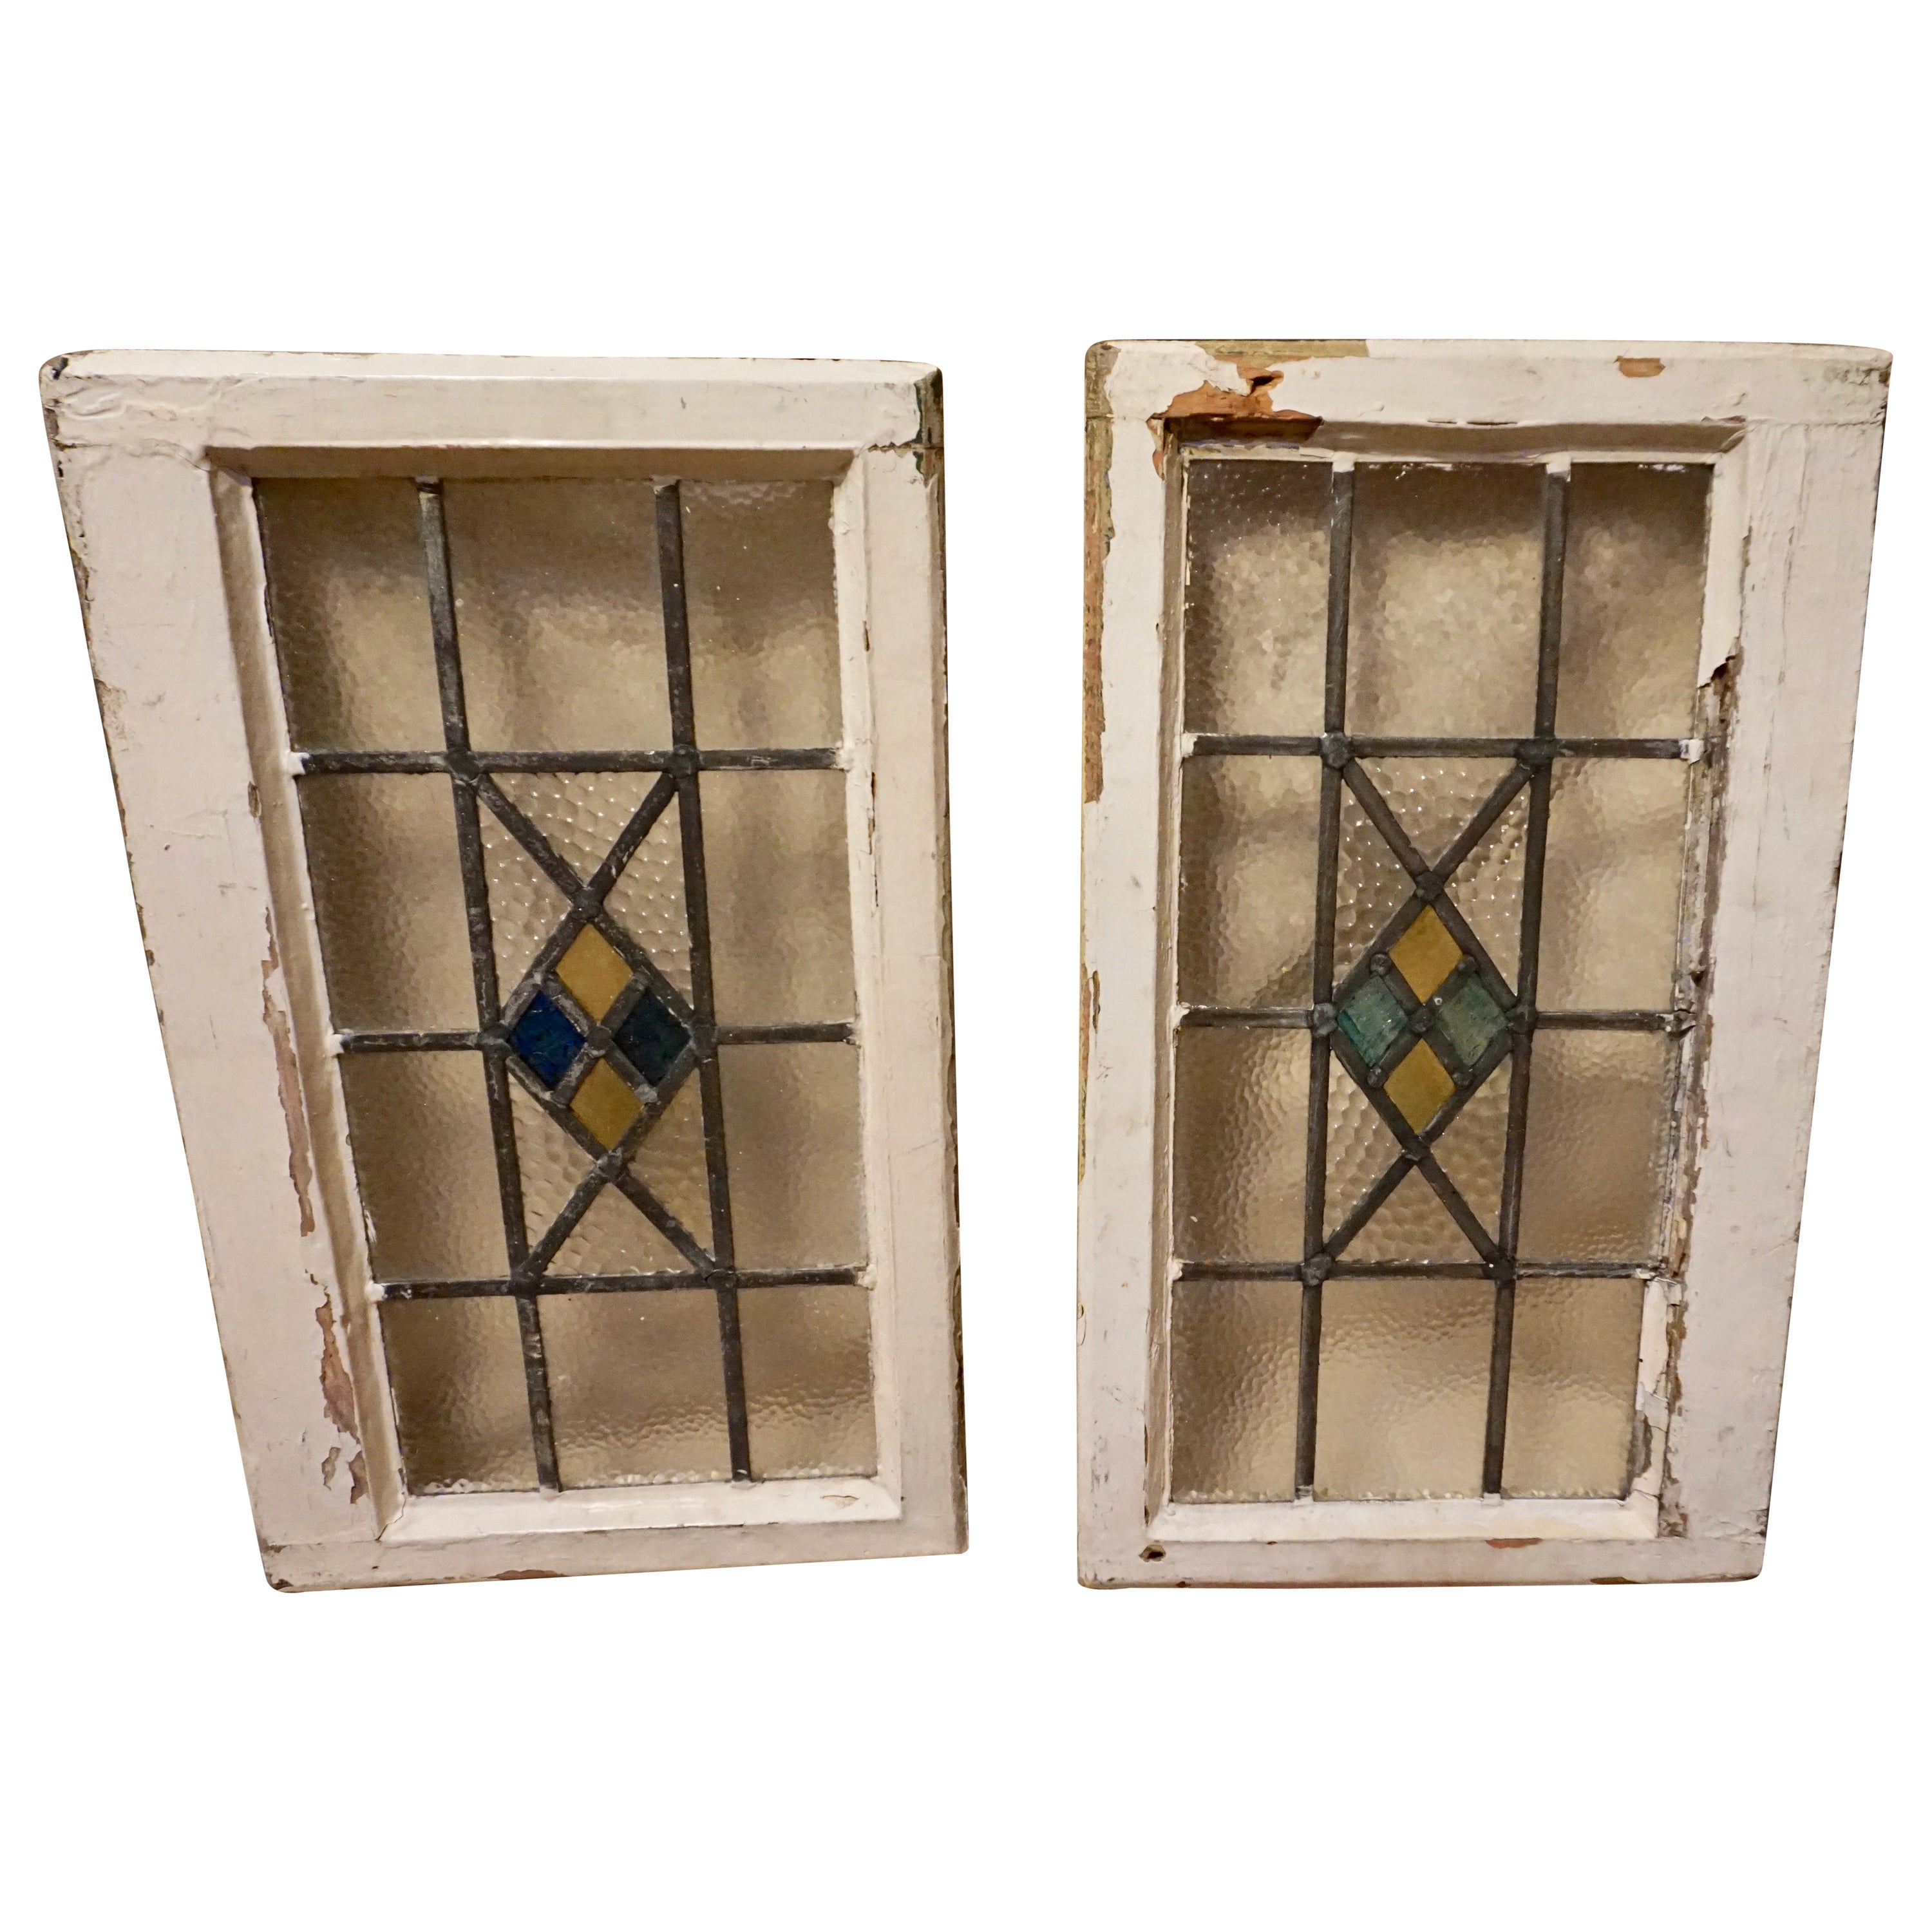 Pair of Art Deco Stained Glass Windows with Geometric Motif